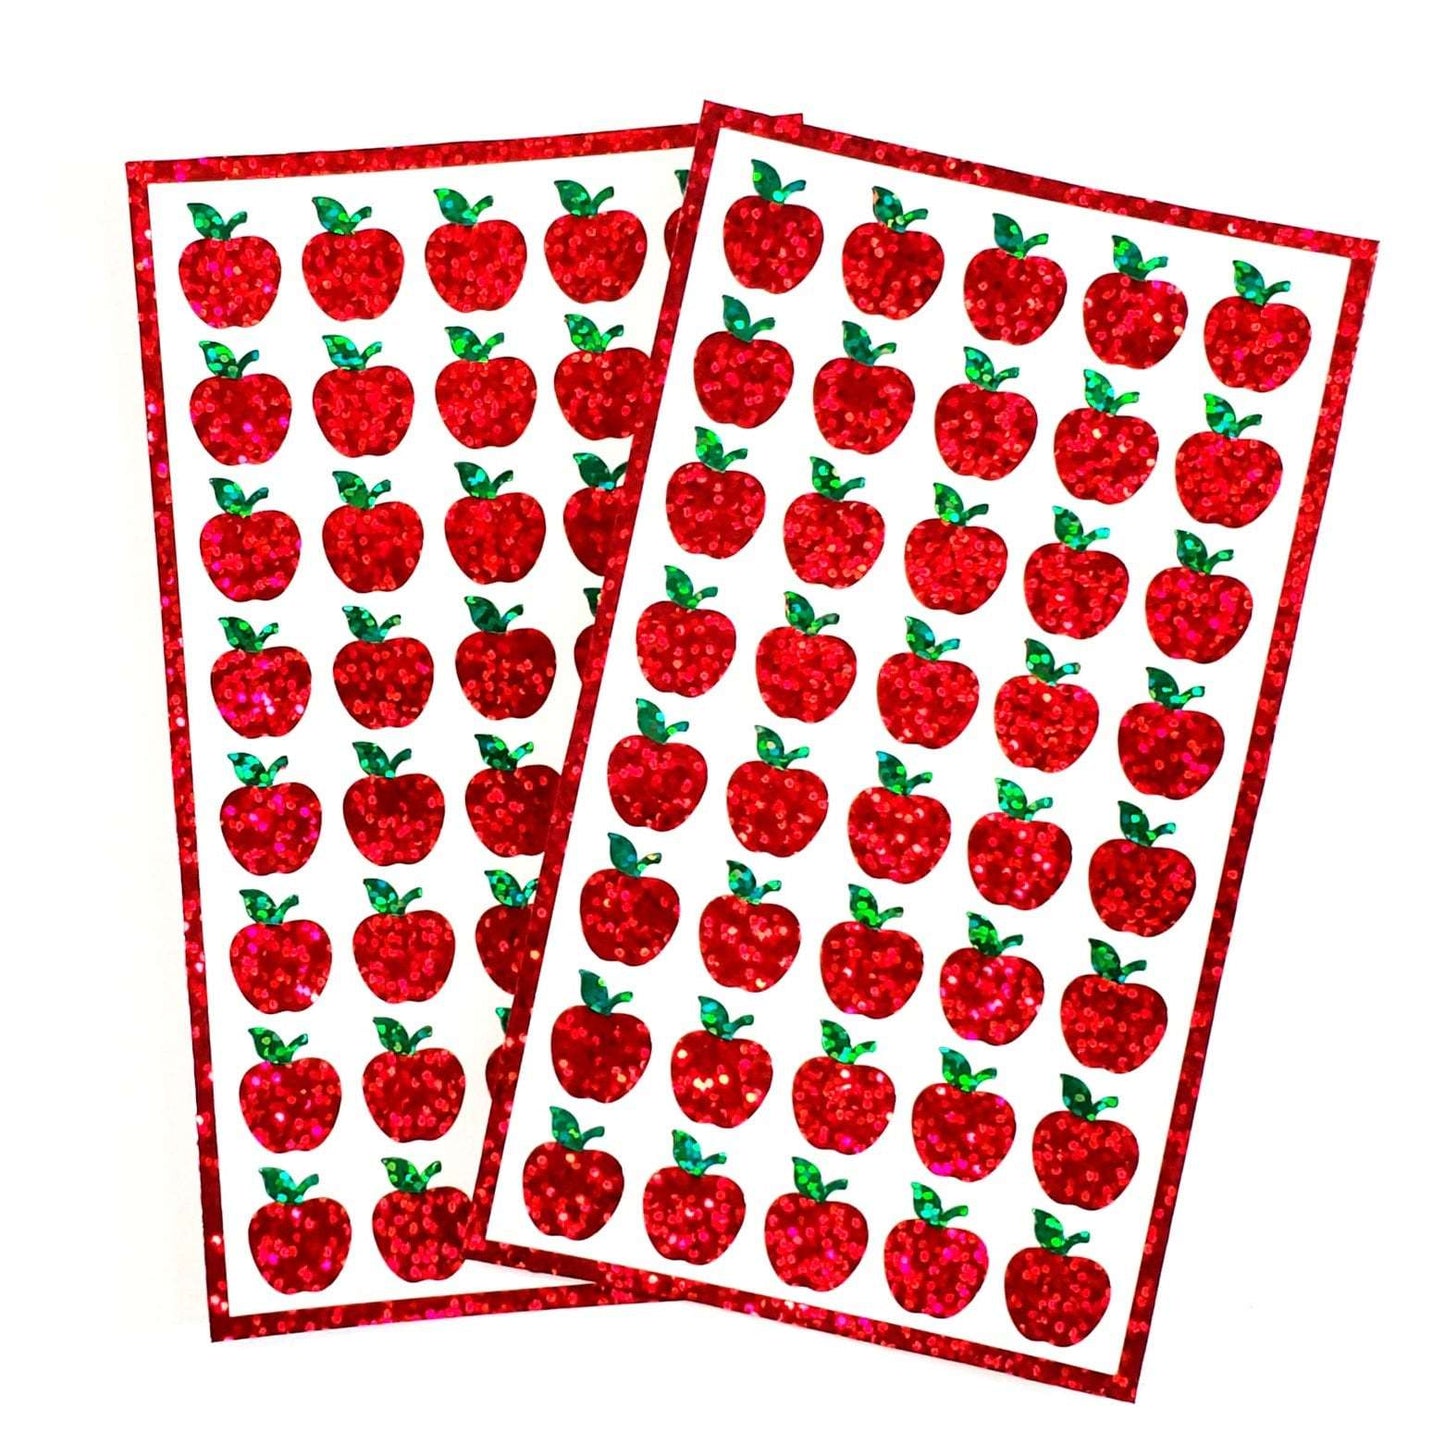 Small Apples Sticker Sheet, set of 40 sparkly red apple vinyl decals, back to school decorations, teacher stickers, recipe card labels.